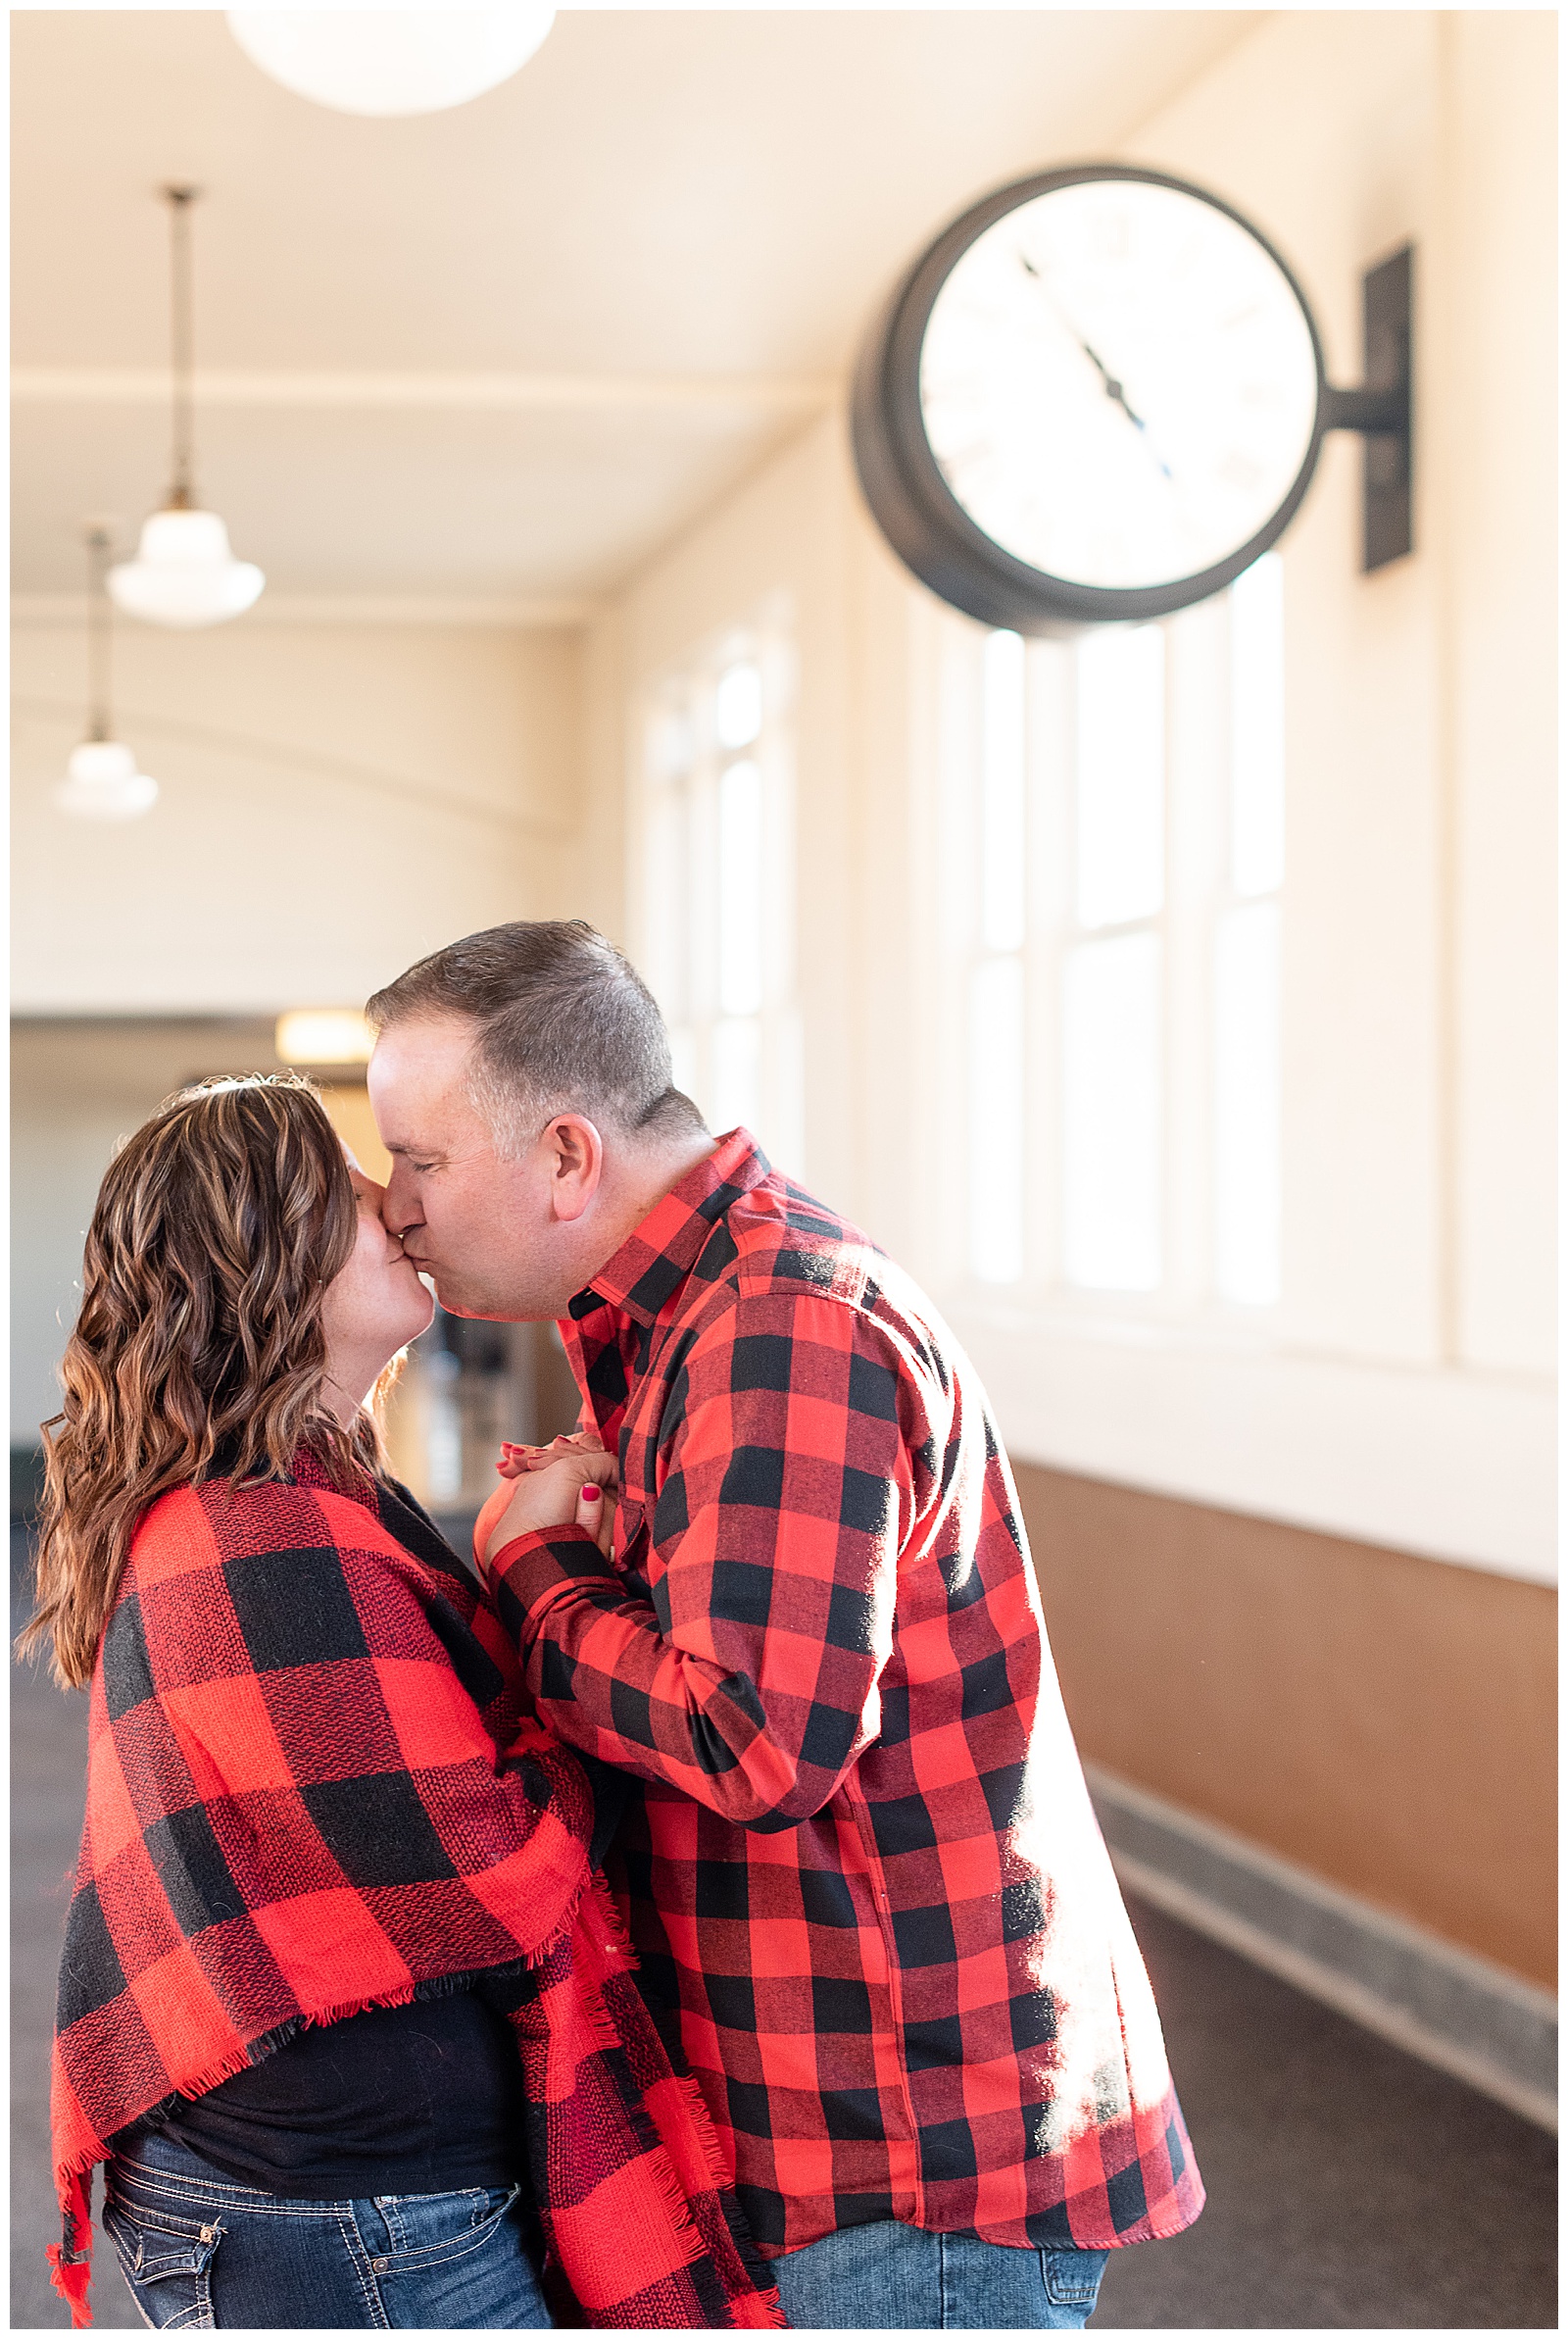 couple kissing inside train station with large clock hanging behind them